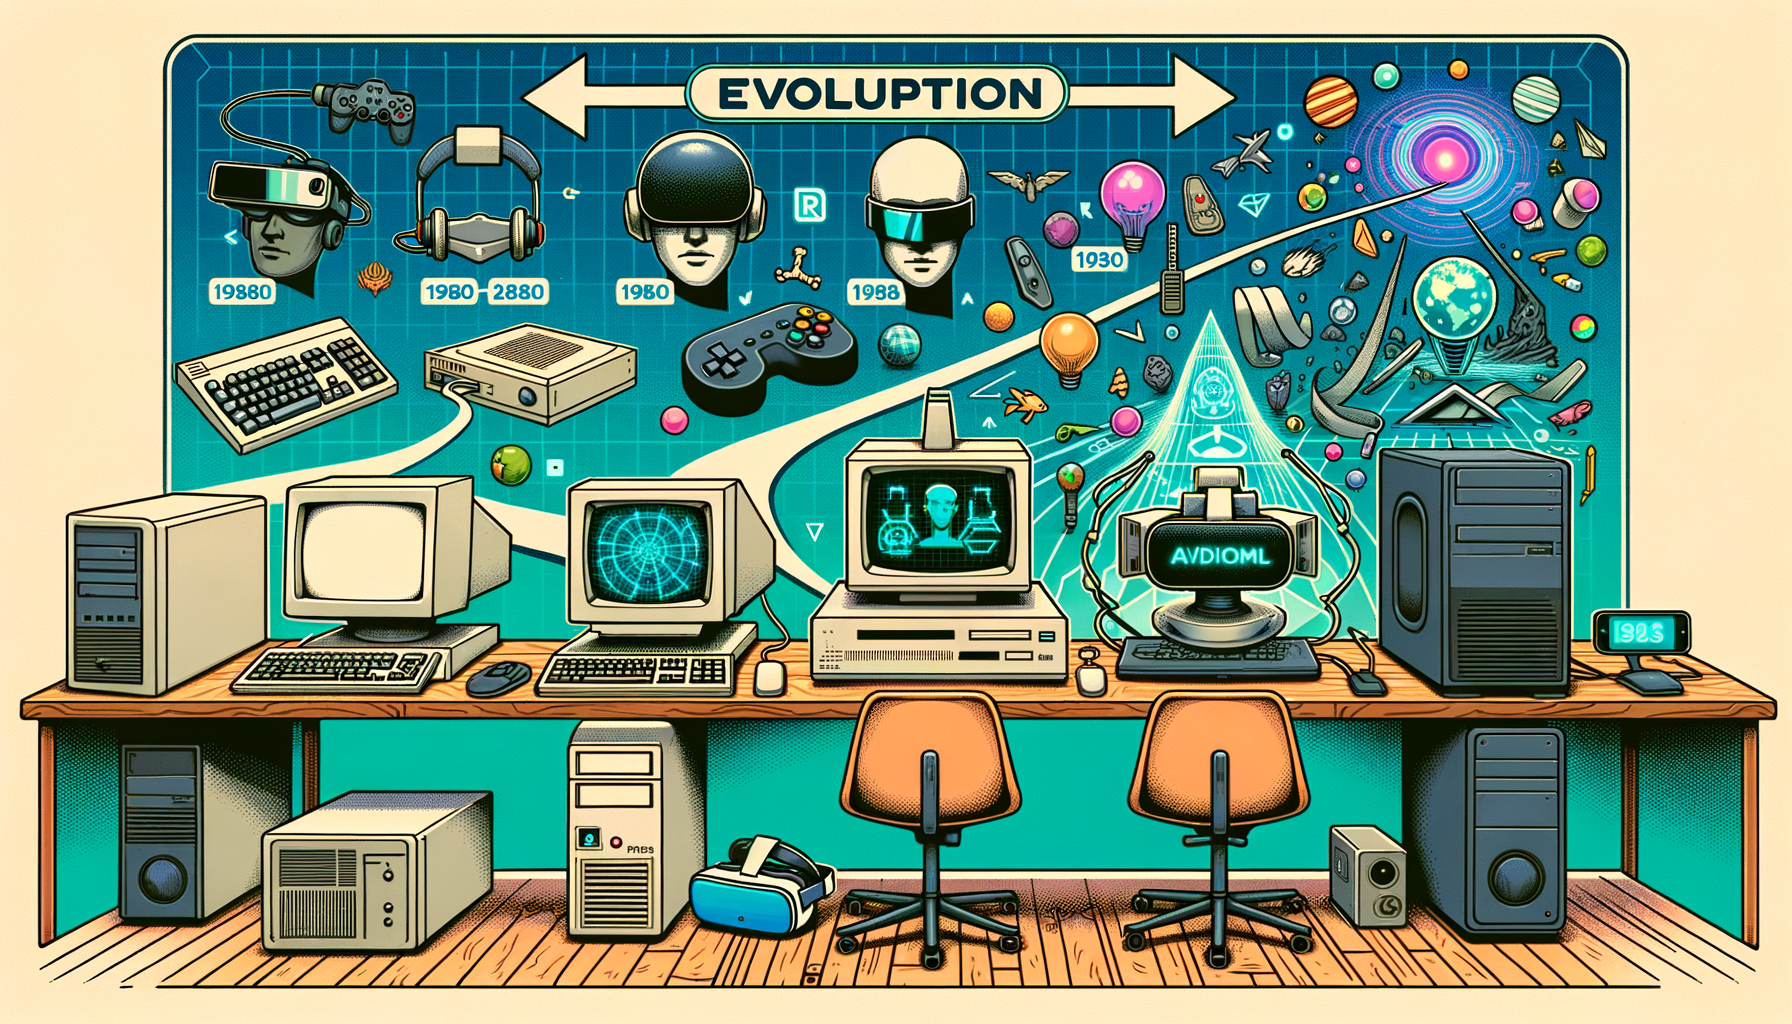 Design Software History: Evolution of Virtual Reality Design Software: From Early Beginnings to Future Innovations